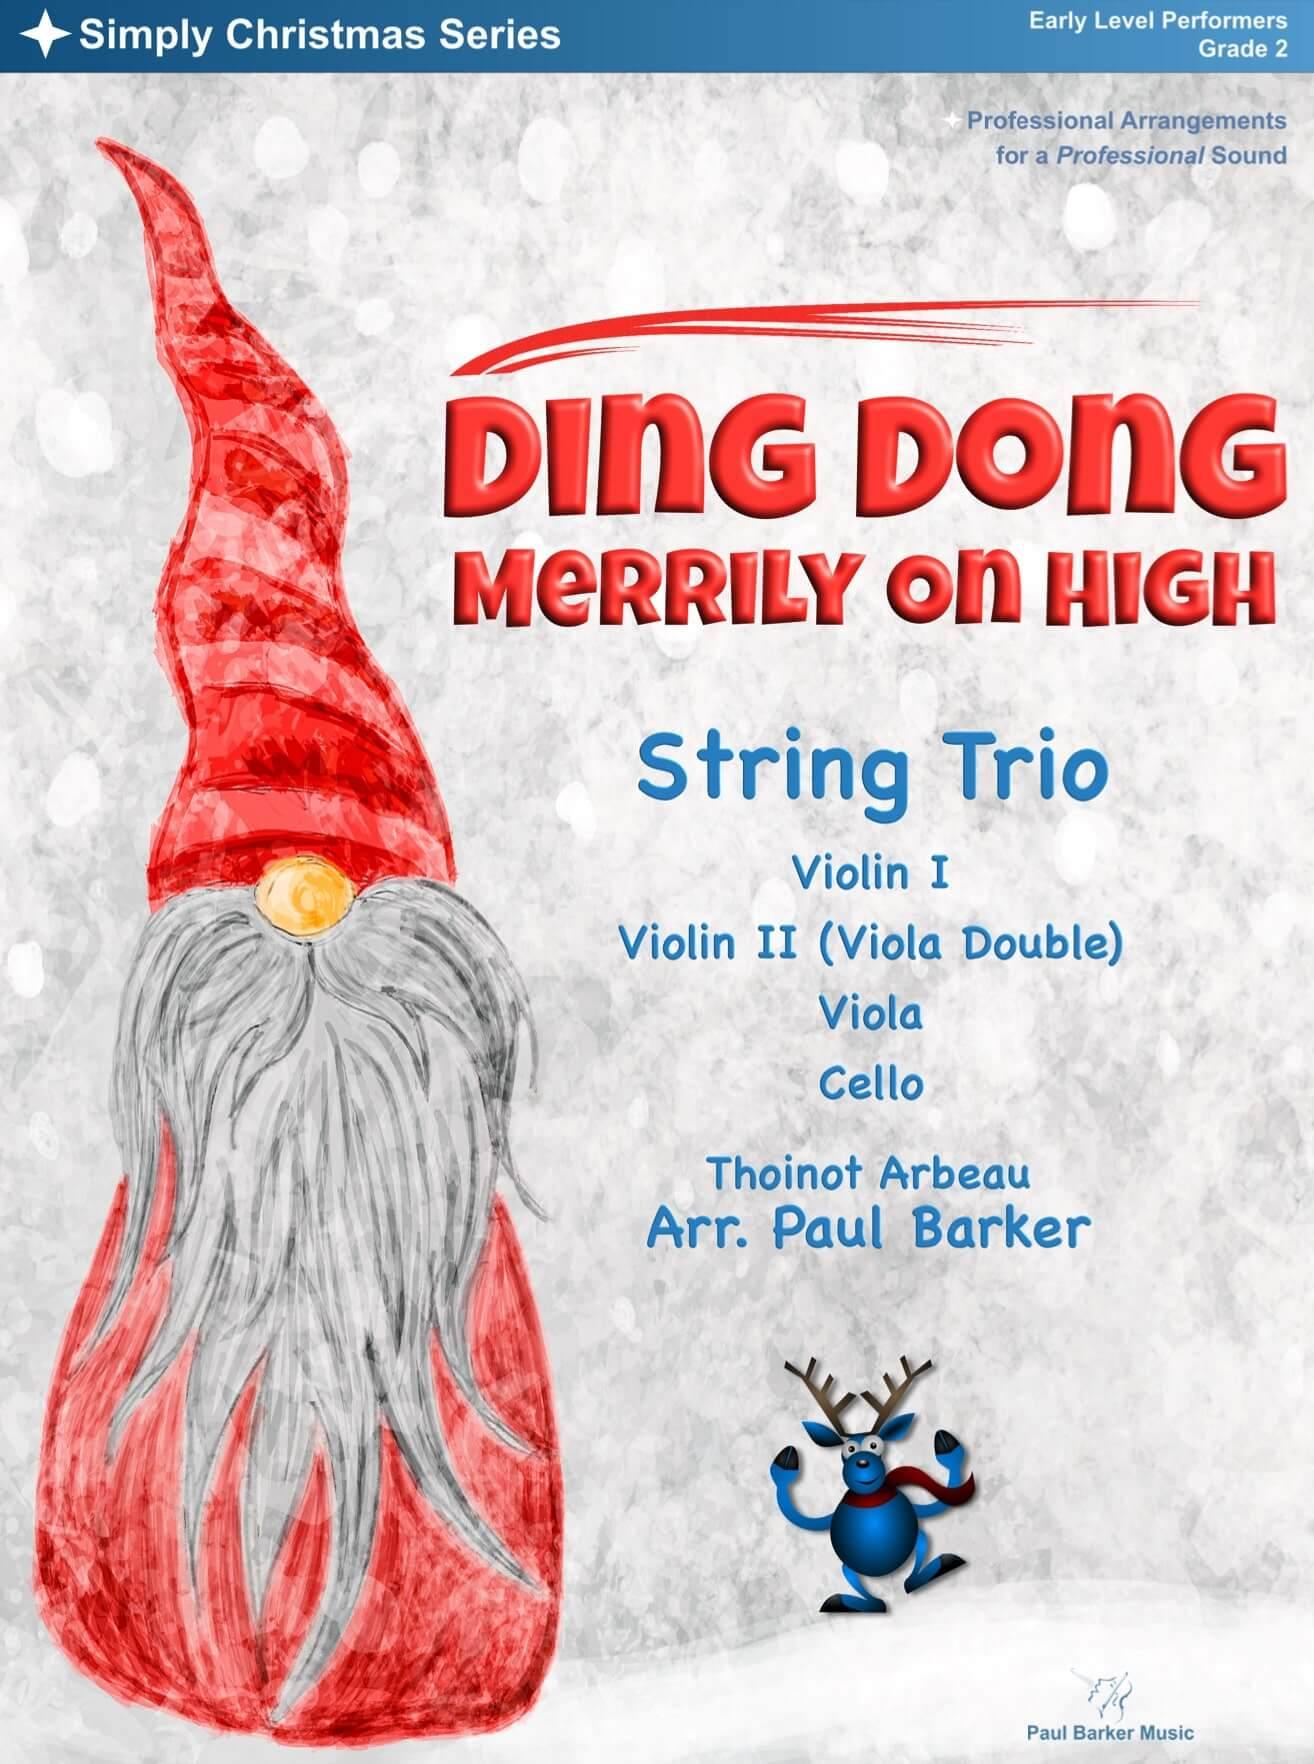 Ding Dong Merrily On High (String Trio) - Paul Barker Music 